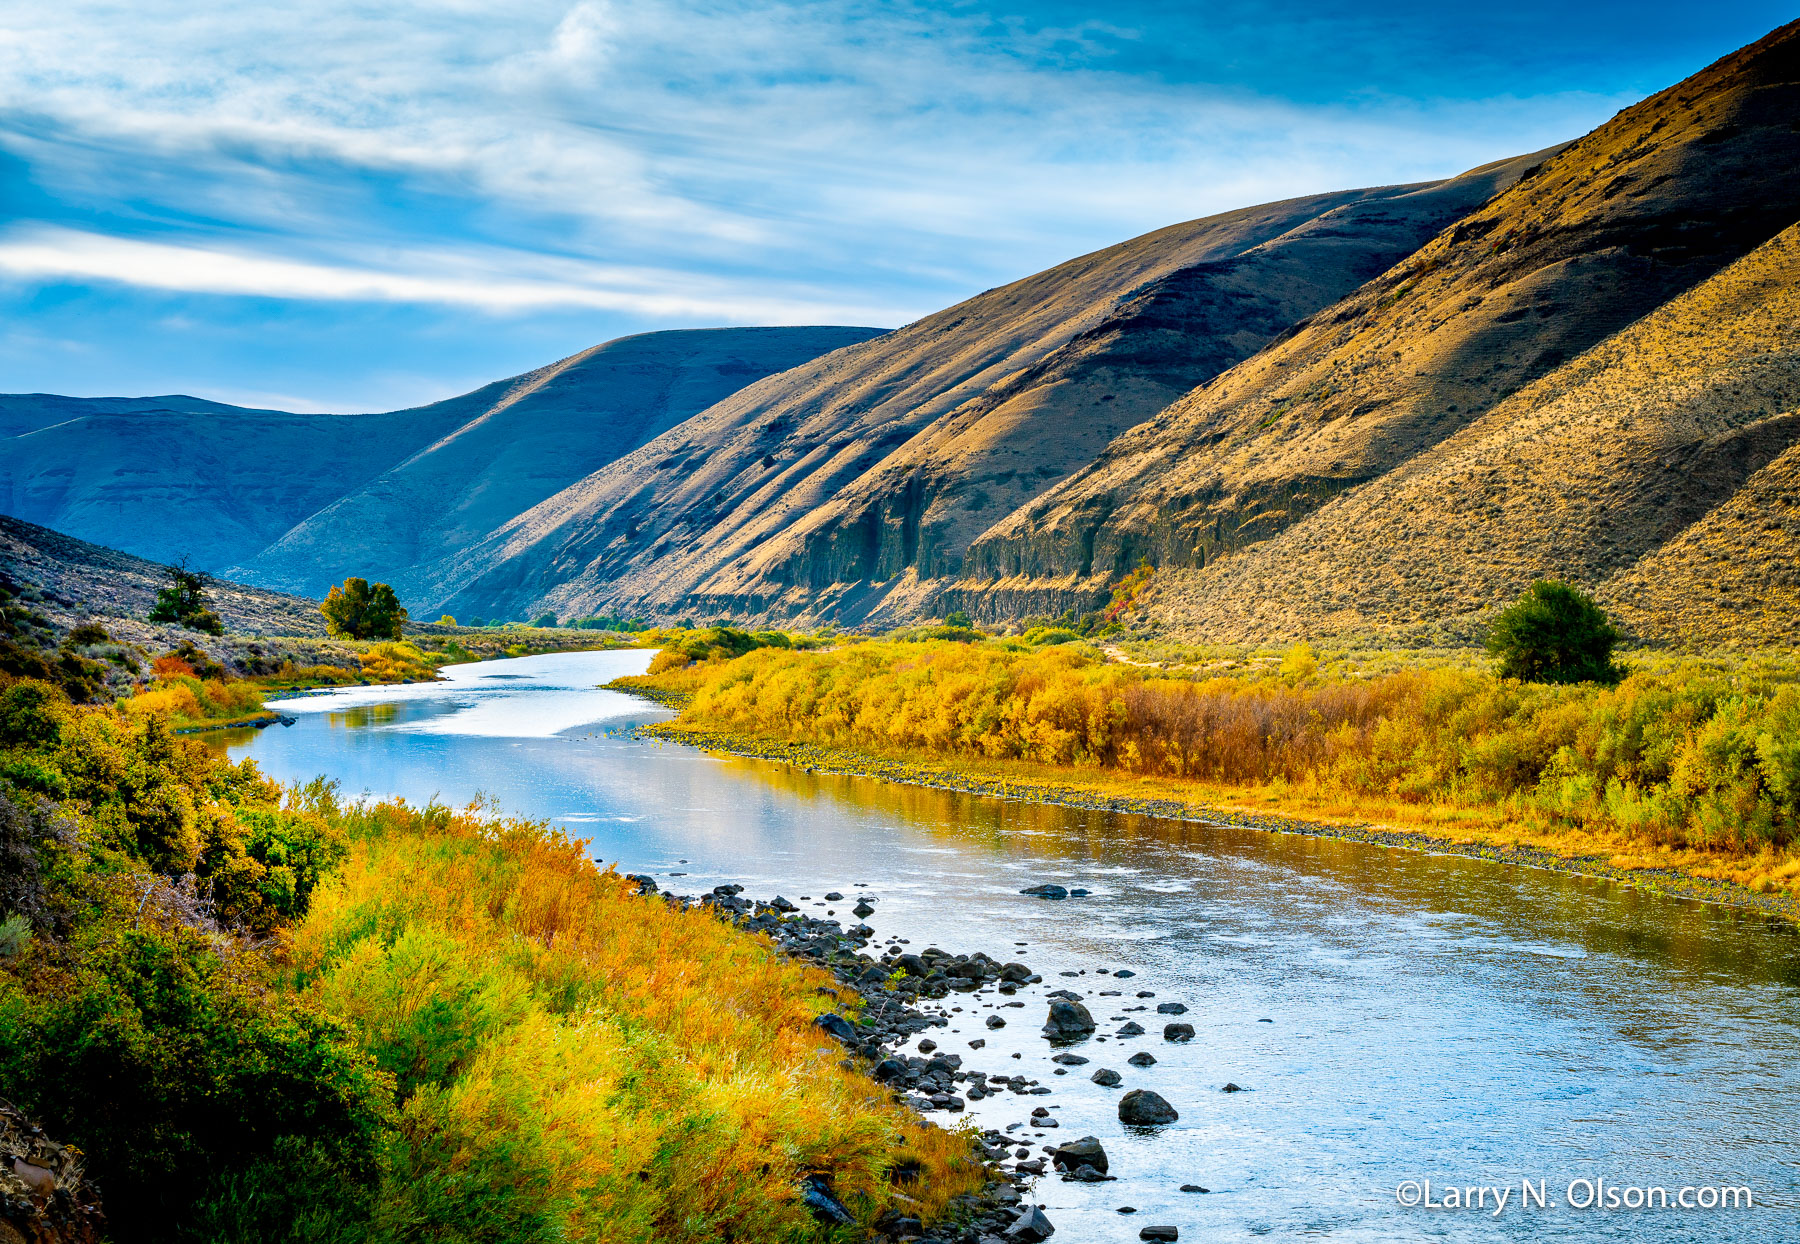 Cottonwood Canyon, John Day River, OR | Early morning in the fall along the willow lined John Day River in Oregon